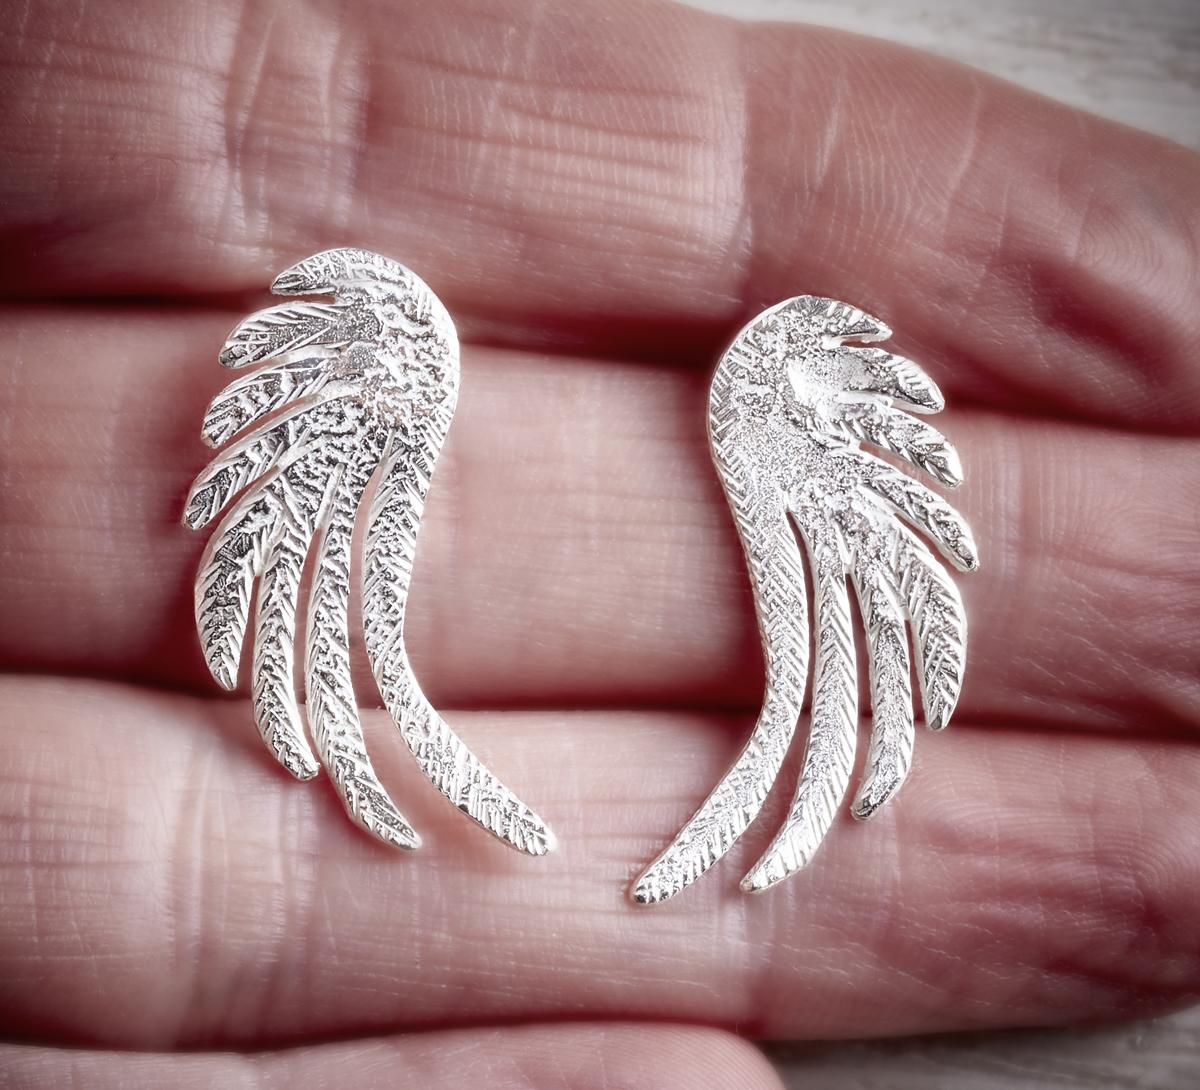 large silver stud angel wing earrings by Fi Mehra available at THE JEWELLERY MAKERS, image property of EMMA WHITE-2